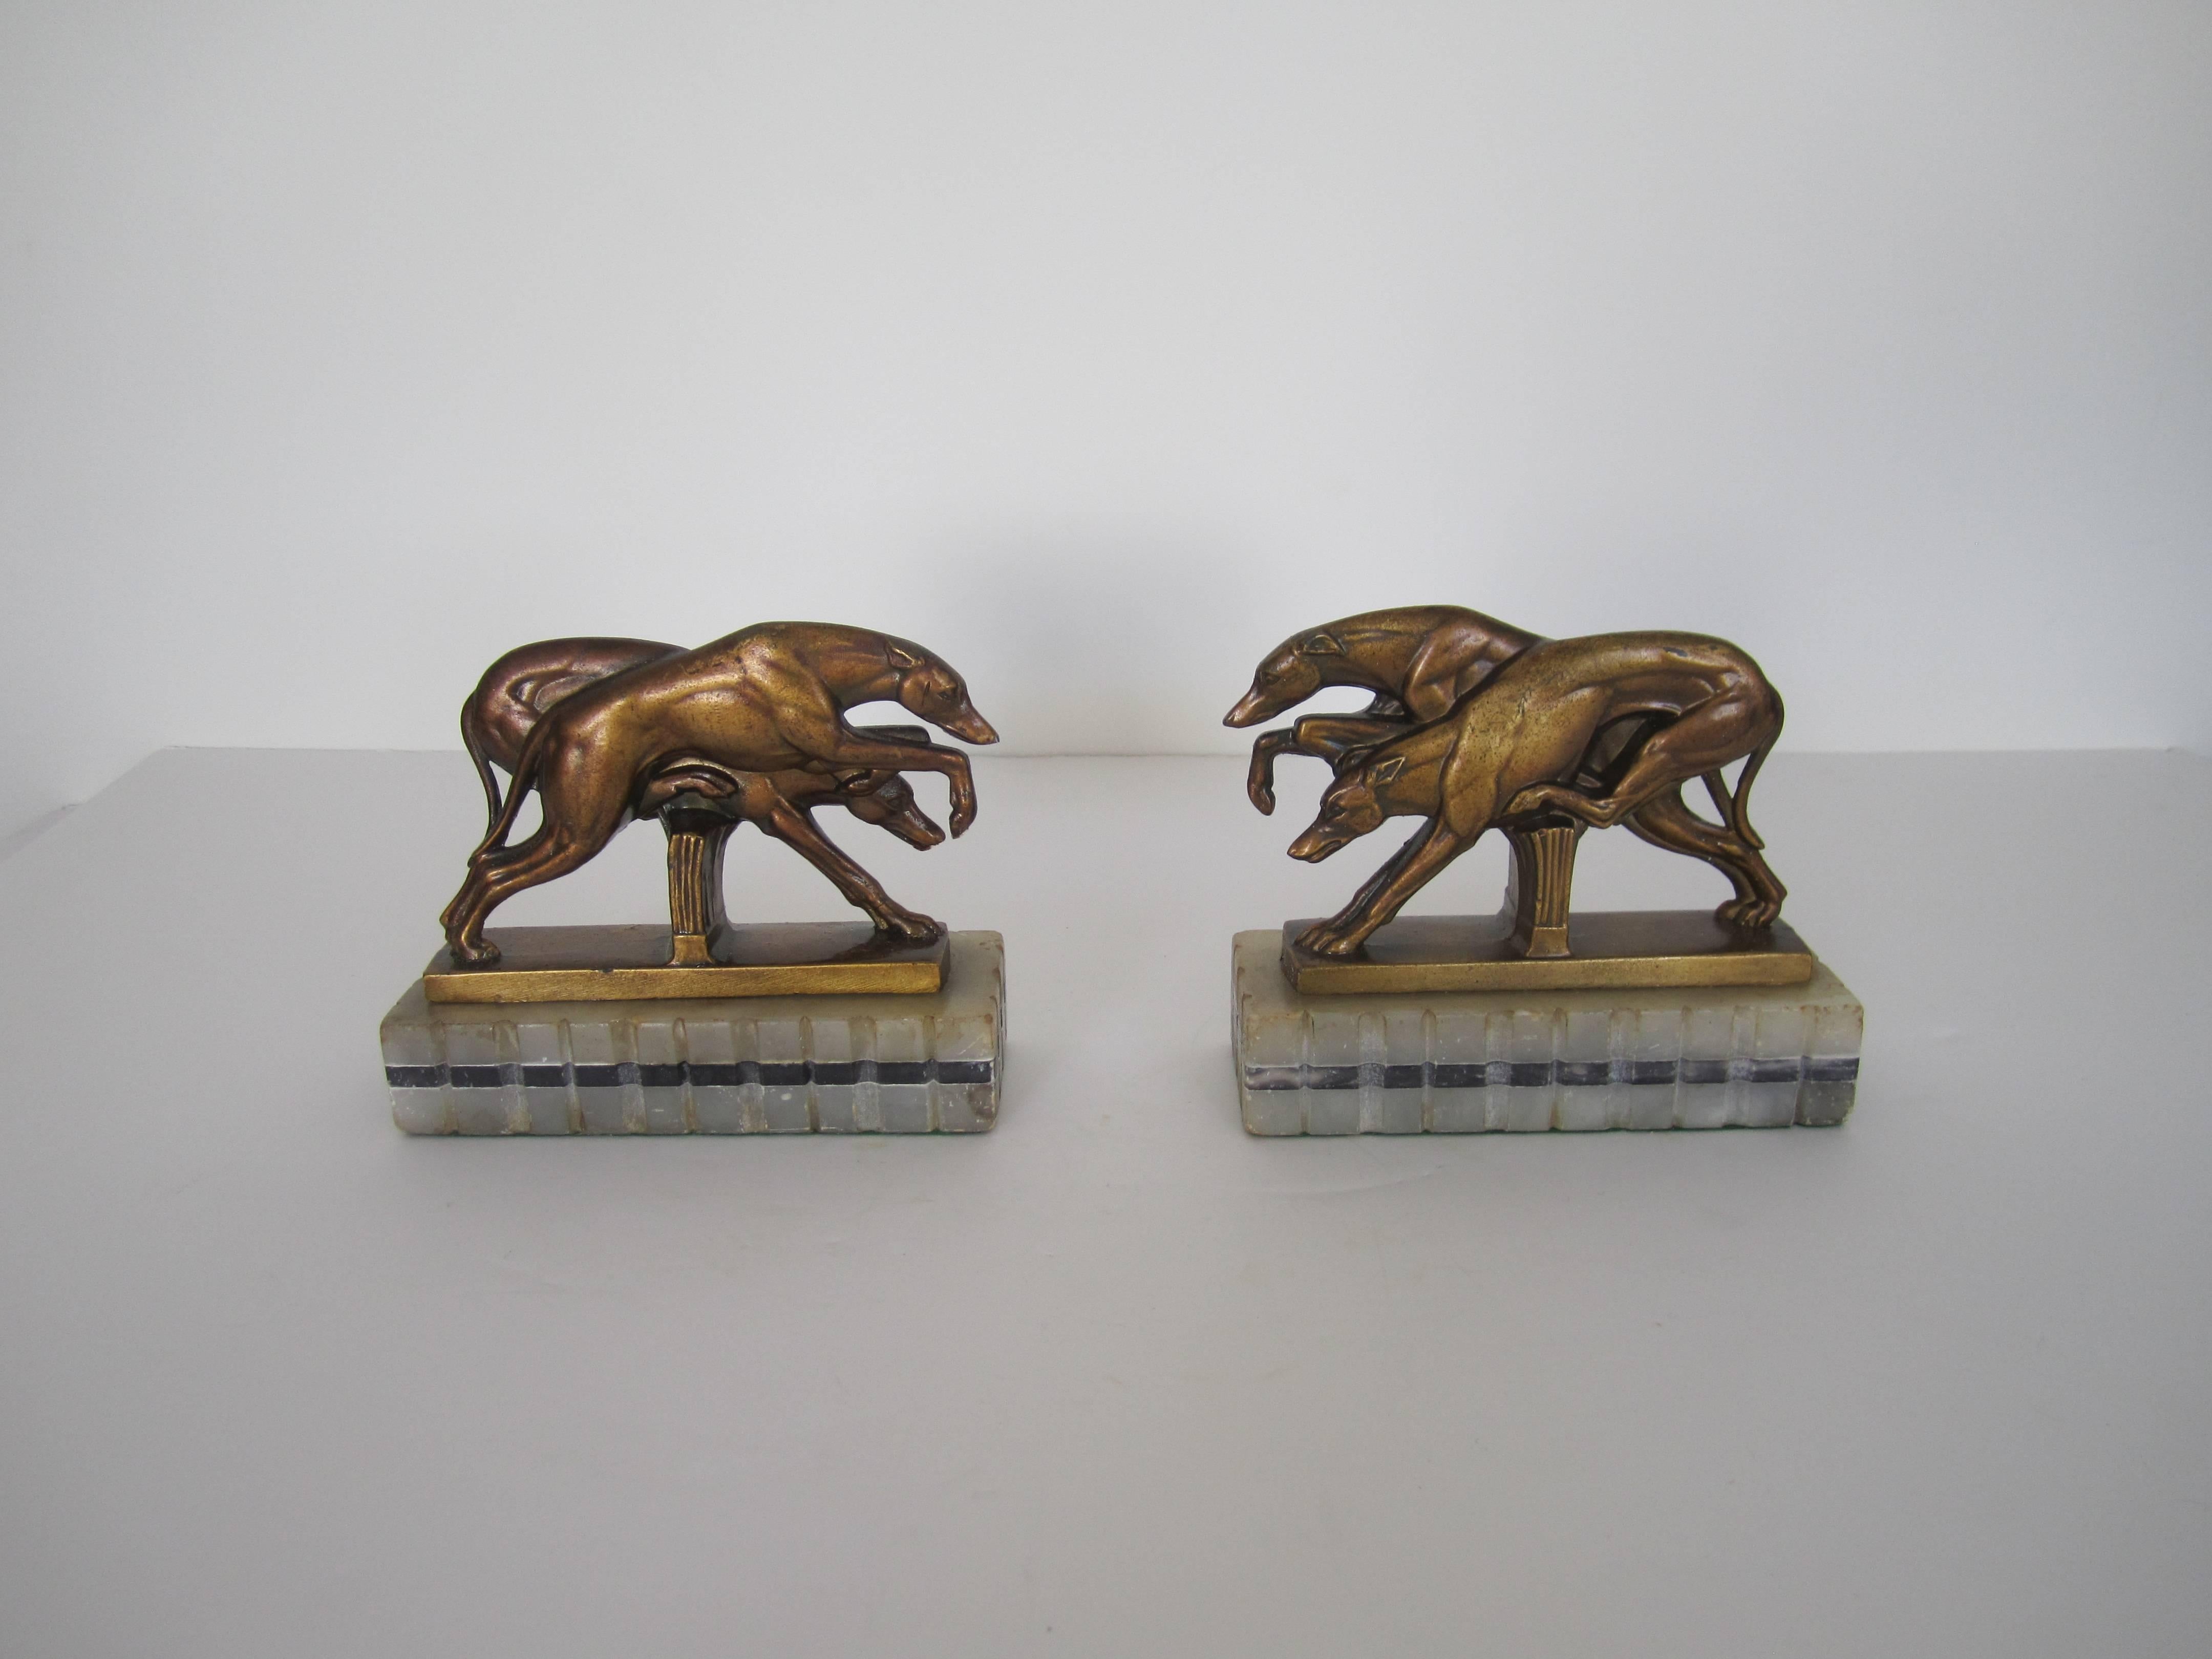 Early 20th Century Vintage Art Deco Greyhound Dog Bookends on Black and White Marble Bases, 1920s